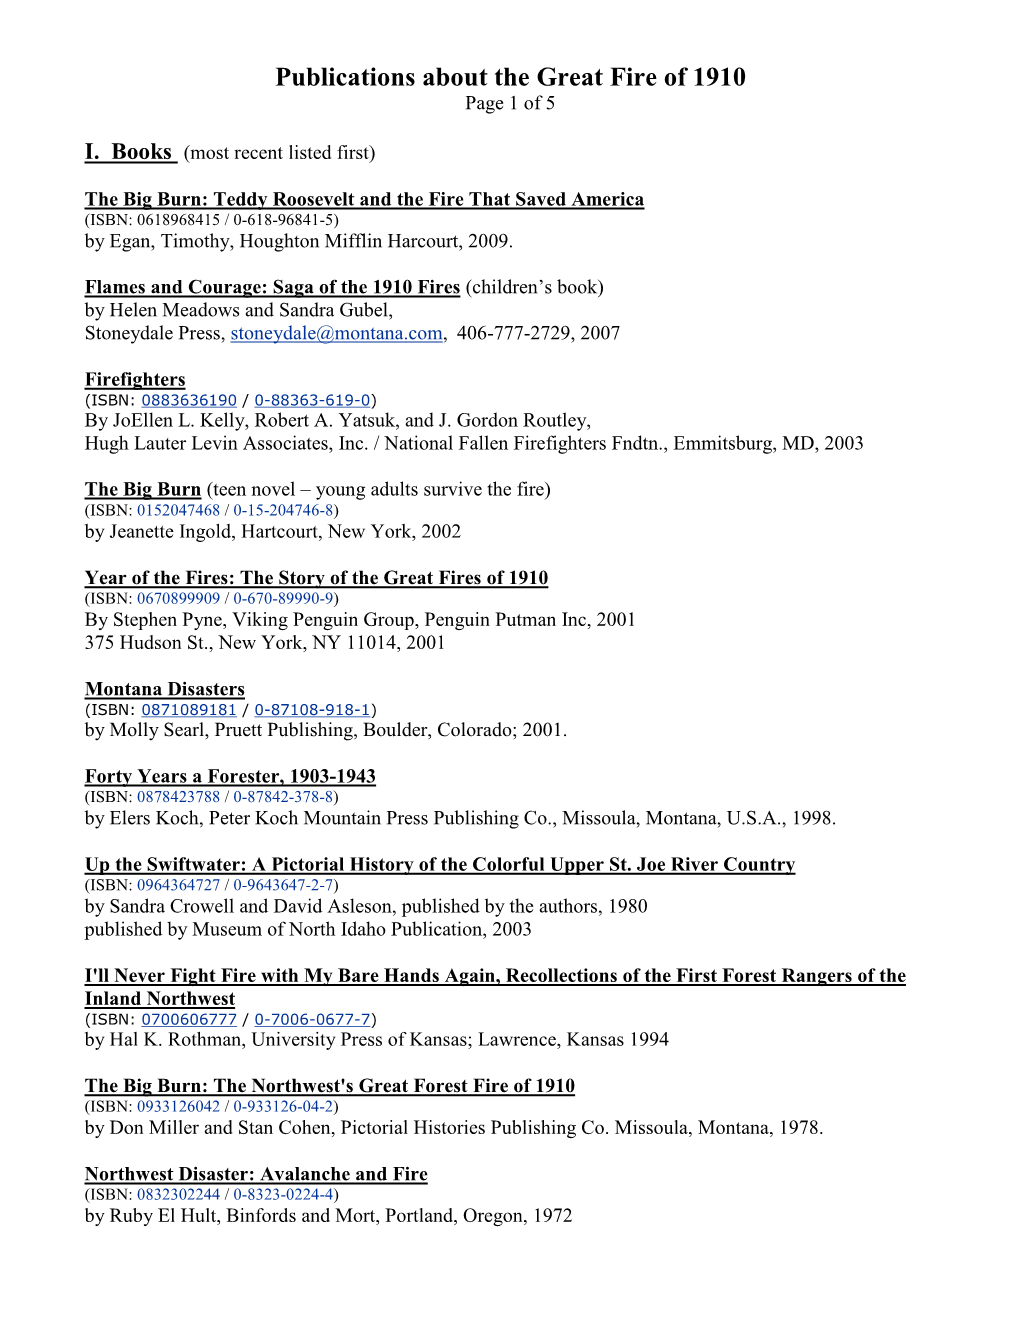 Books About the Great Fire of 1910